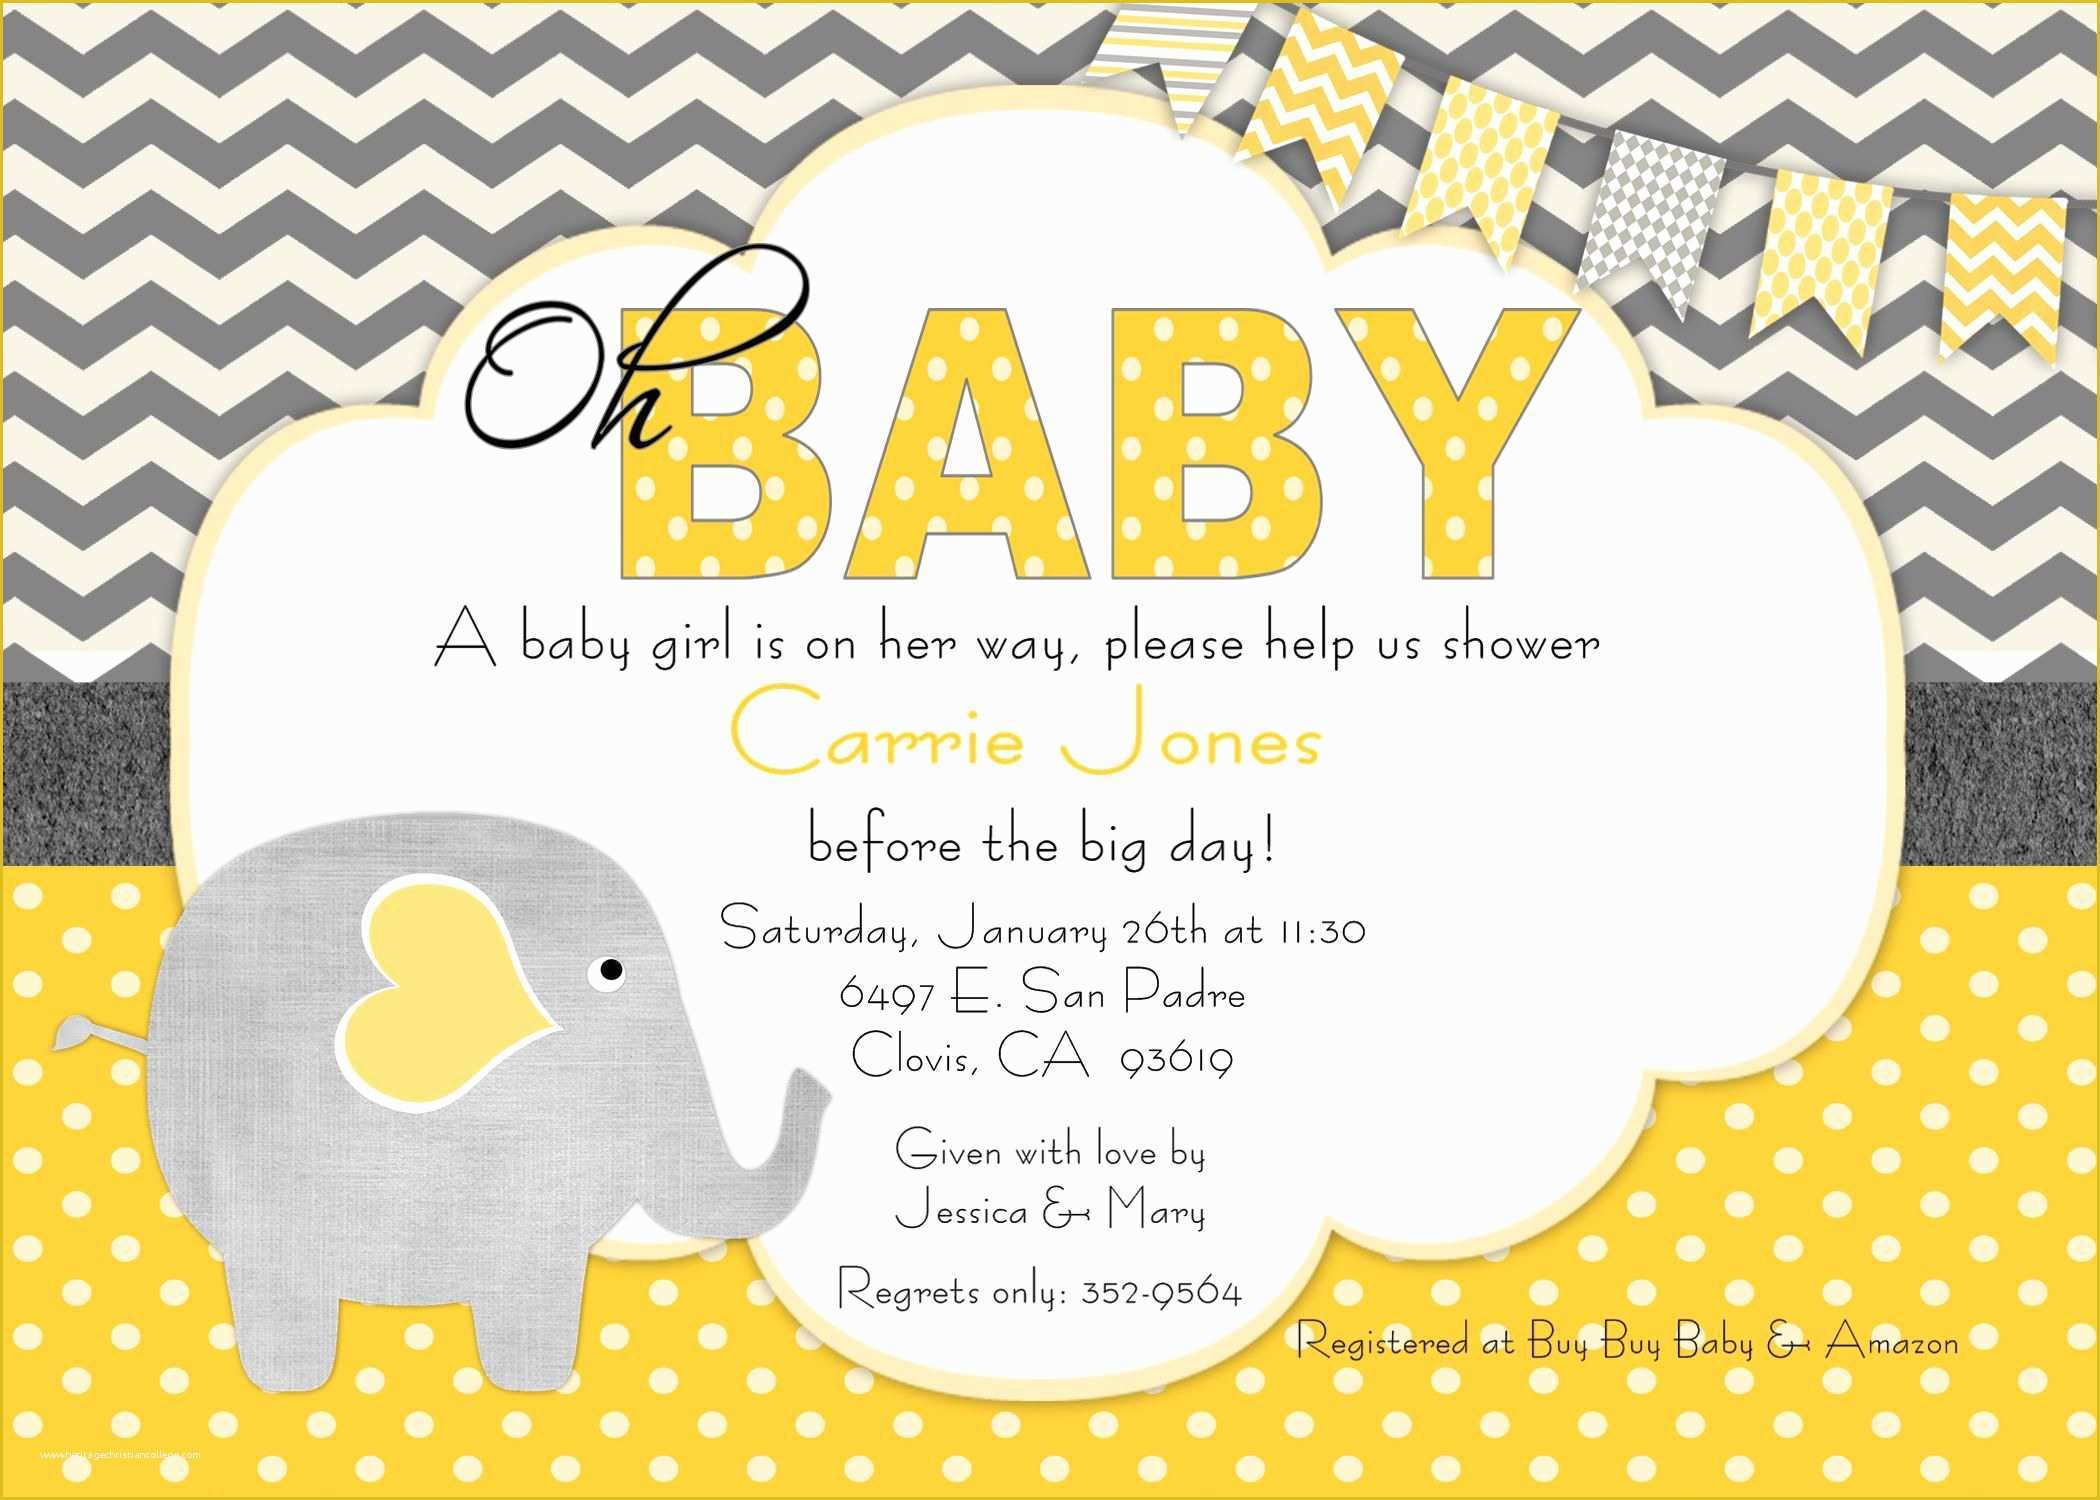 Baby Shower Invitation Card Template Free Download Of Baby Shower Invitation Free Baby Shower Invitation